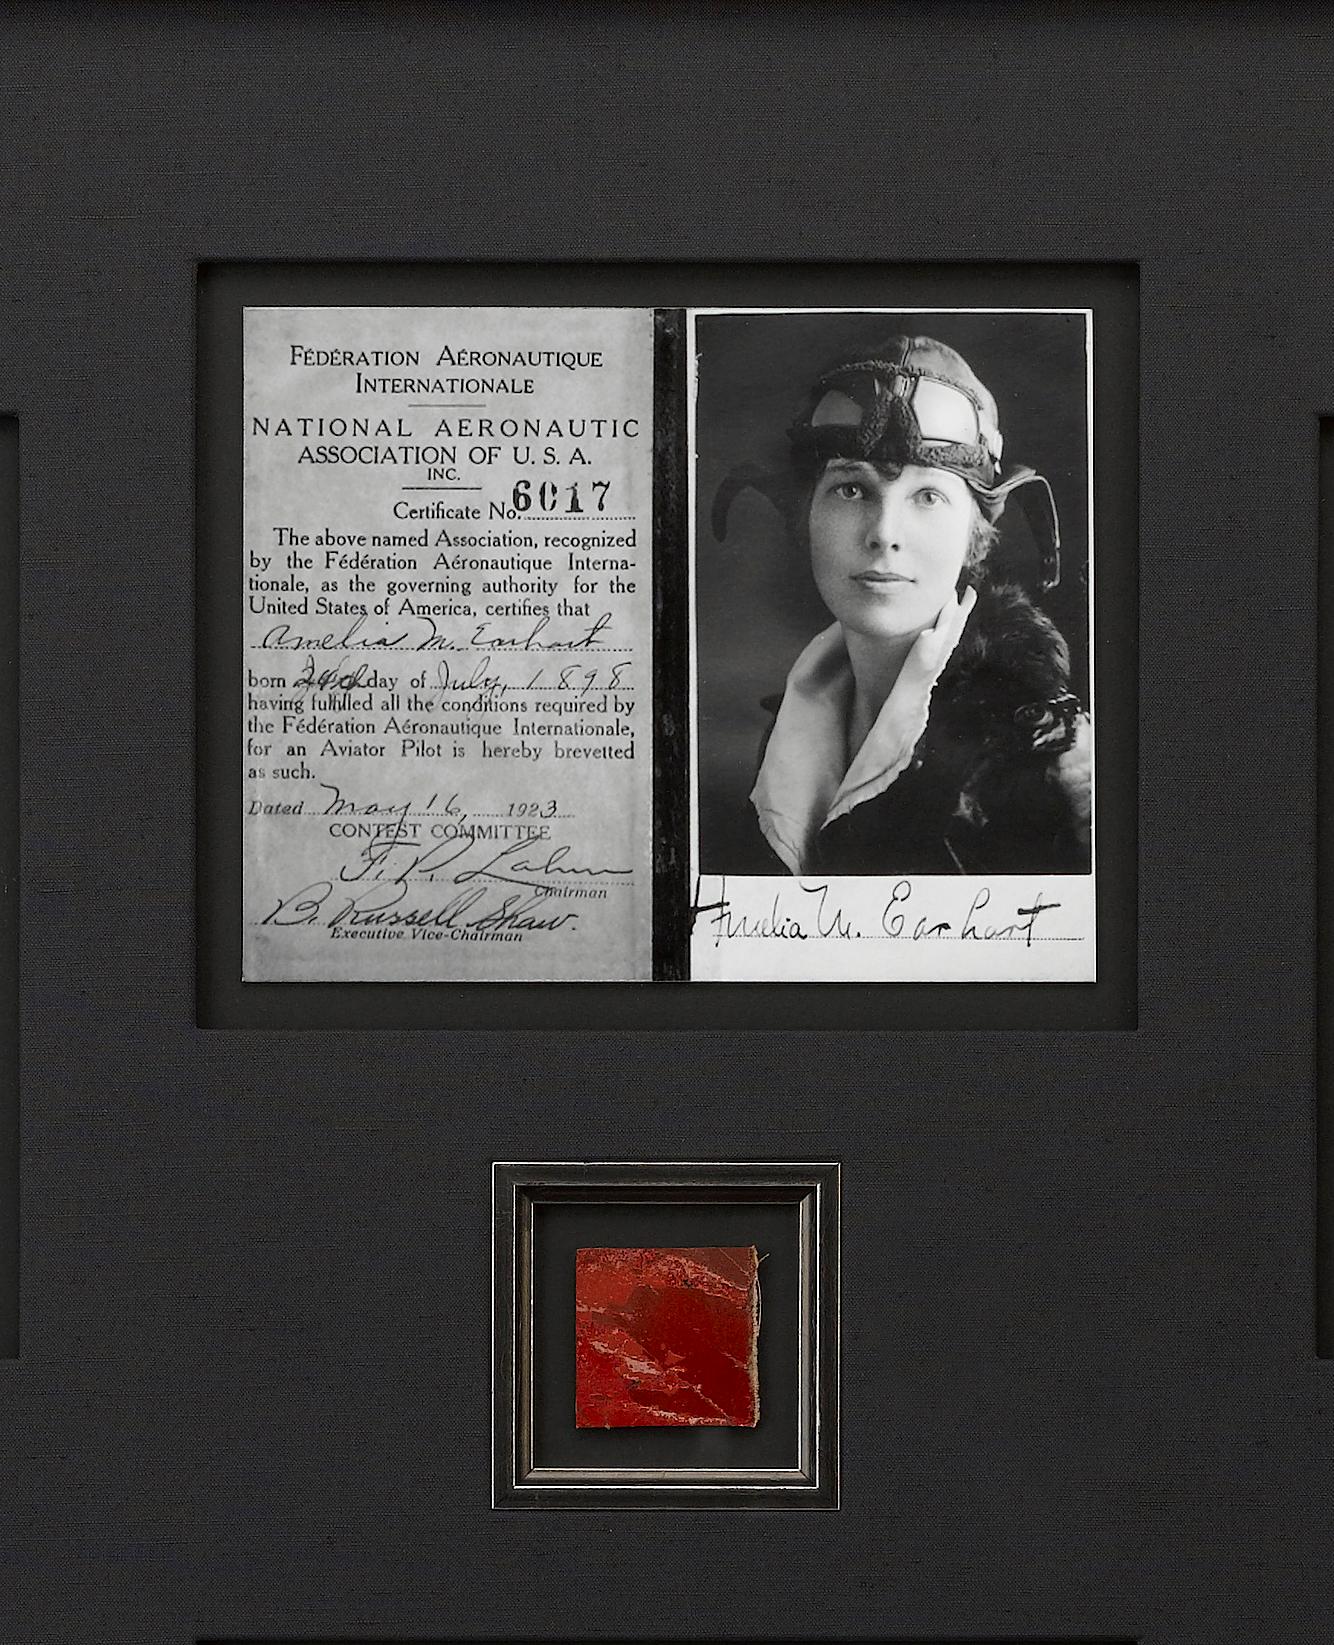 Exceptional collection of early American aviation history -- featuring wing cloth from the plane Amelia Earhart used to become the first woman to cross the Atlantic Ocean.

The piece also features a full Earhart autograph on a commemorative